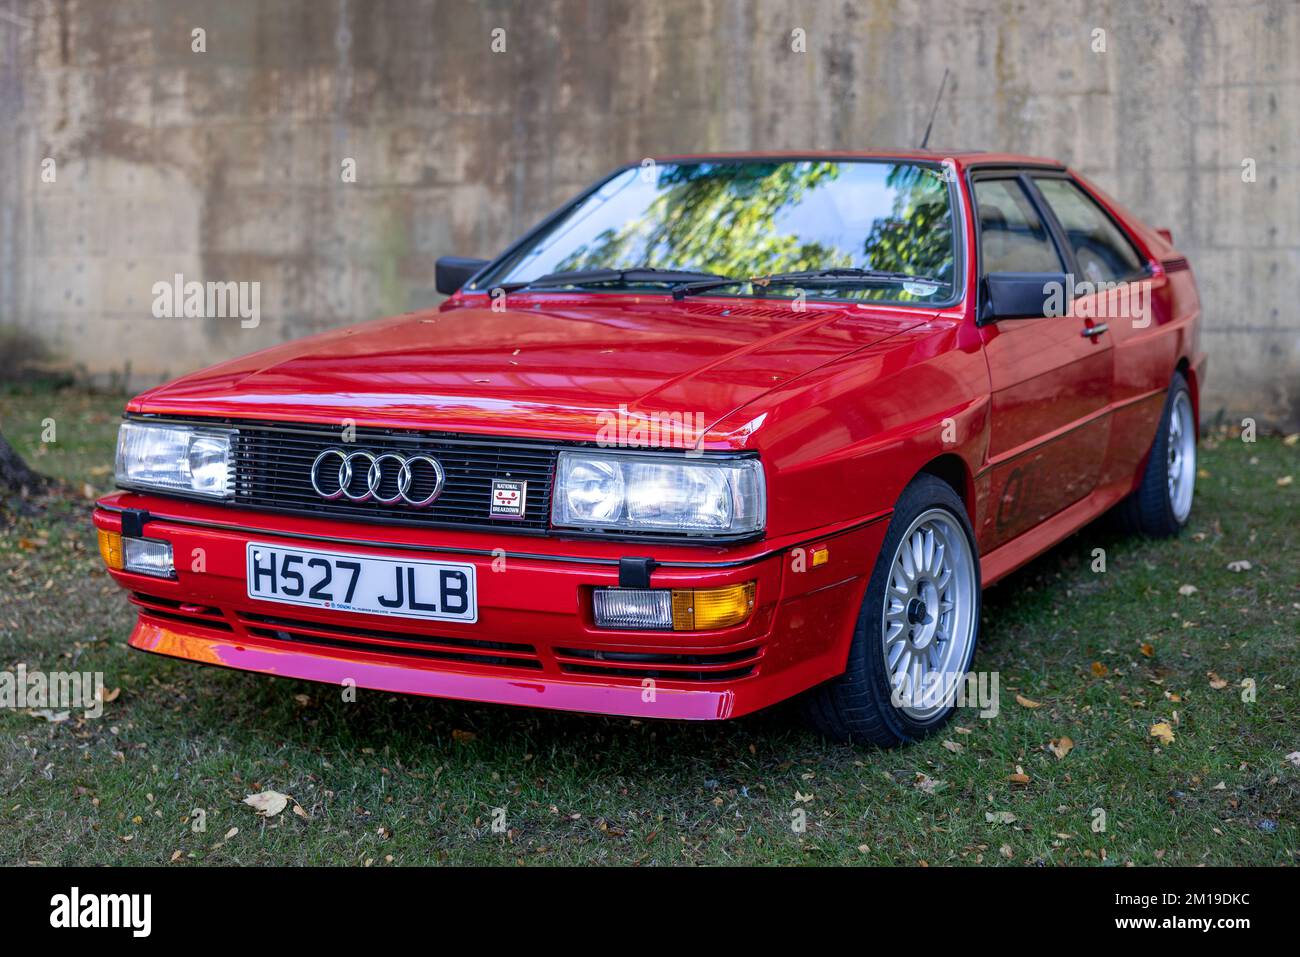 1990 Audi Quattro Turbo ‘H527 JLB’ on display at the October Scramble held at the Bicester Heritage Centre on the 9th October 2022 Stock Photo